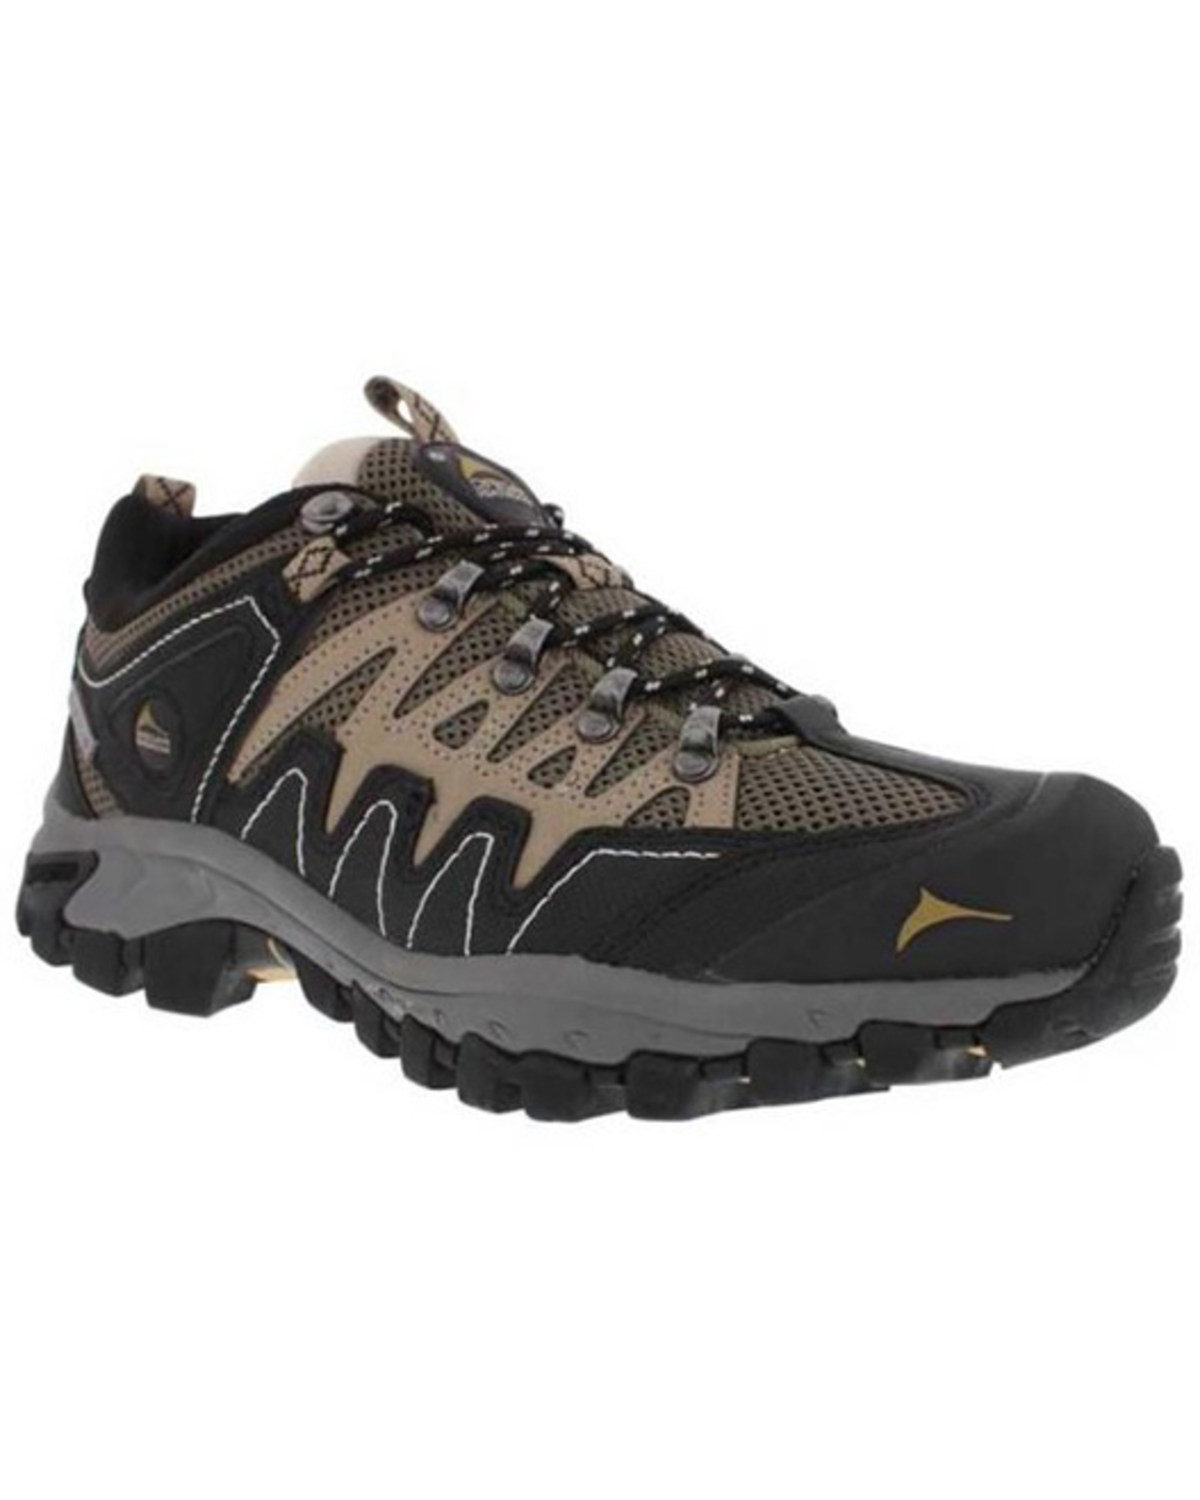 Pacific Mountain Men's Dutton Low Lace-Up Waterproof Hiking Shoes - Round Toe